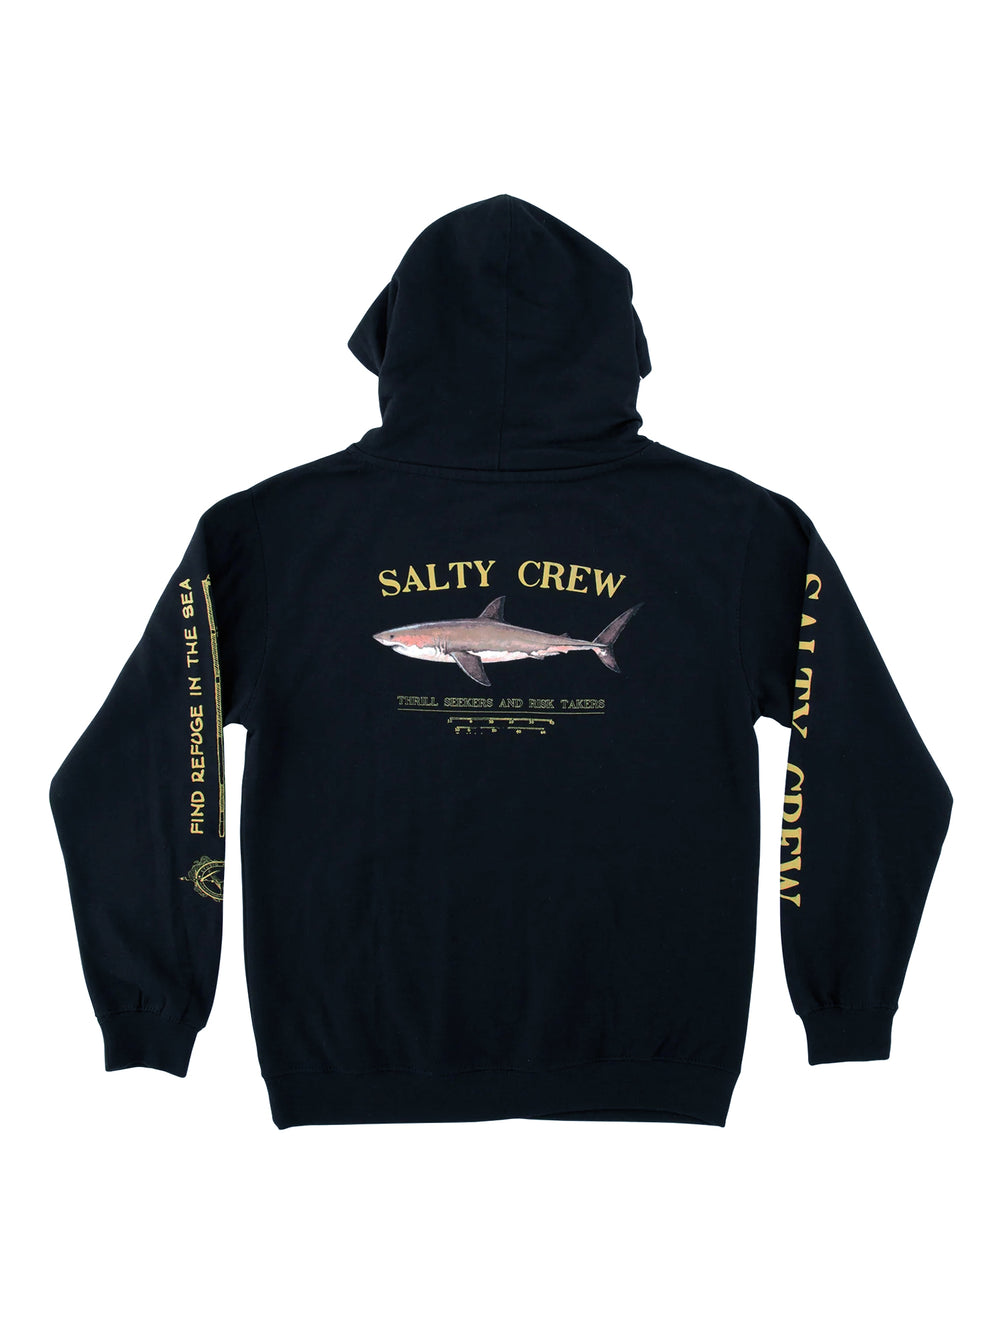 KIDS YOUTH BOYS SALTY CREW BRUCE HOODIE - CLEARANCE